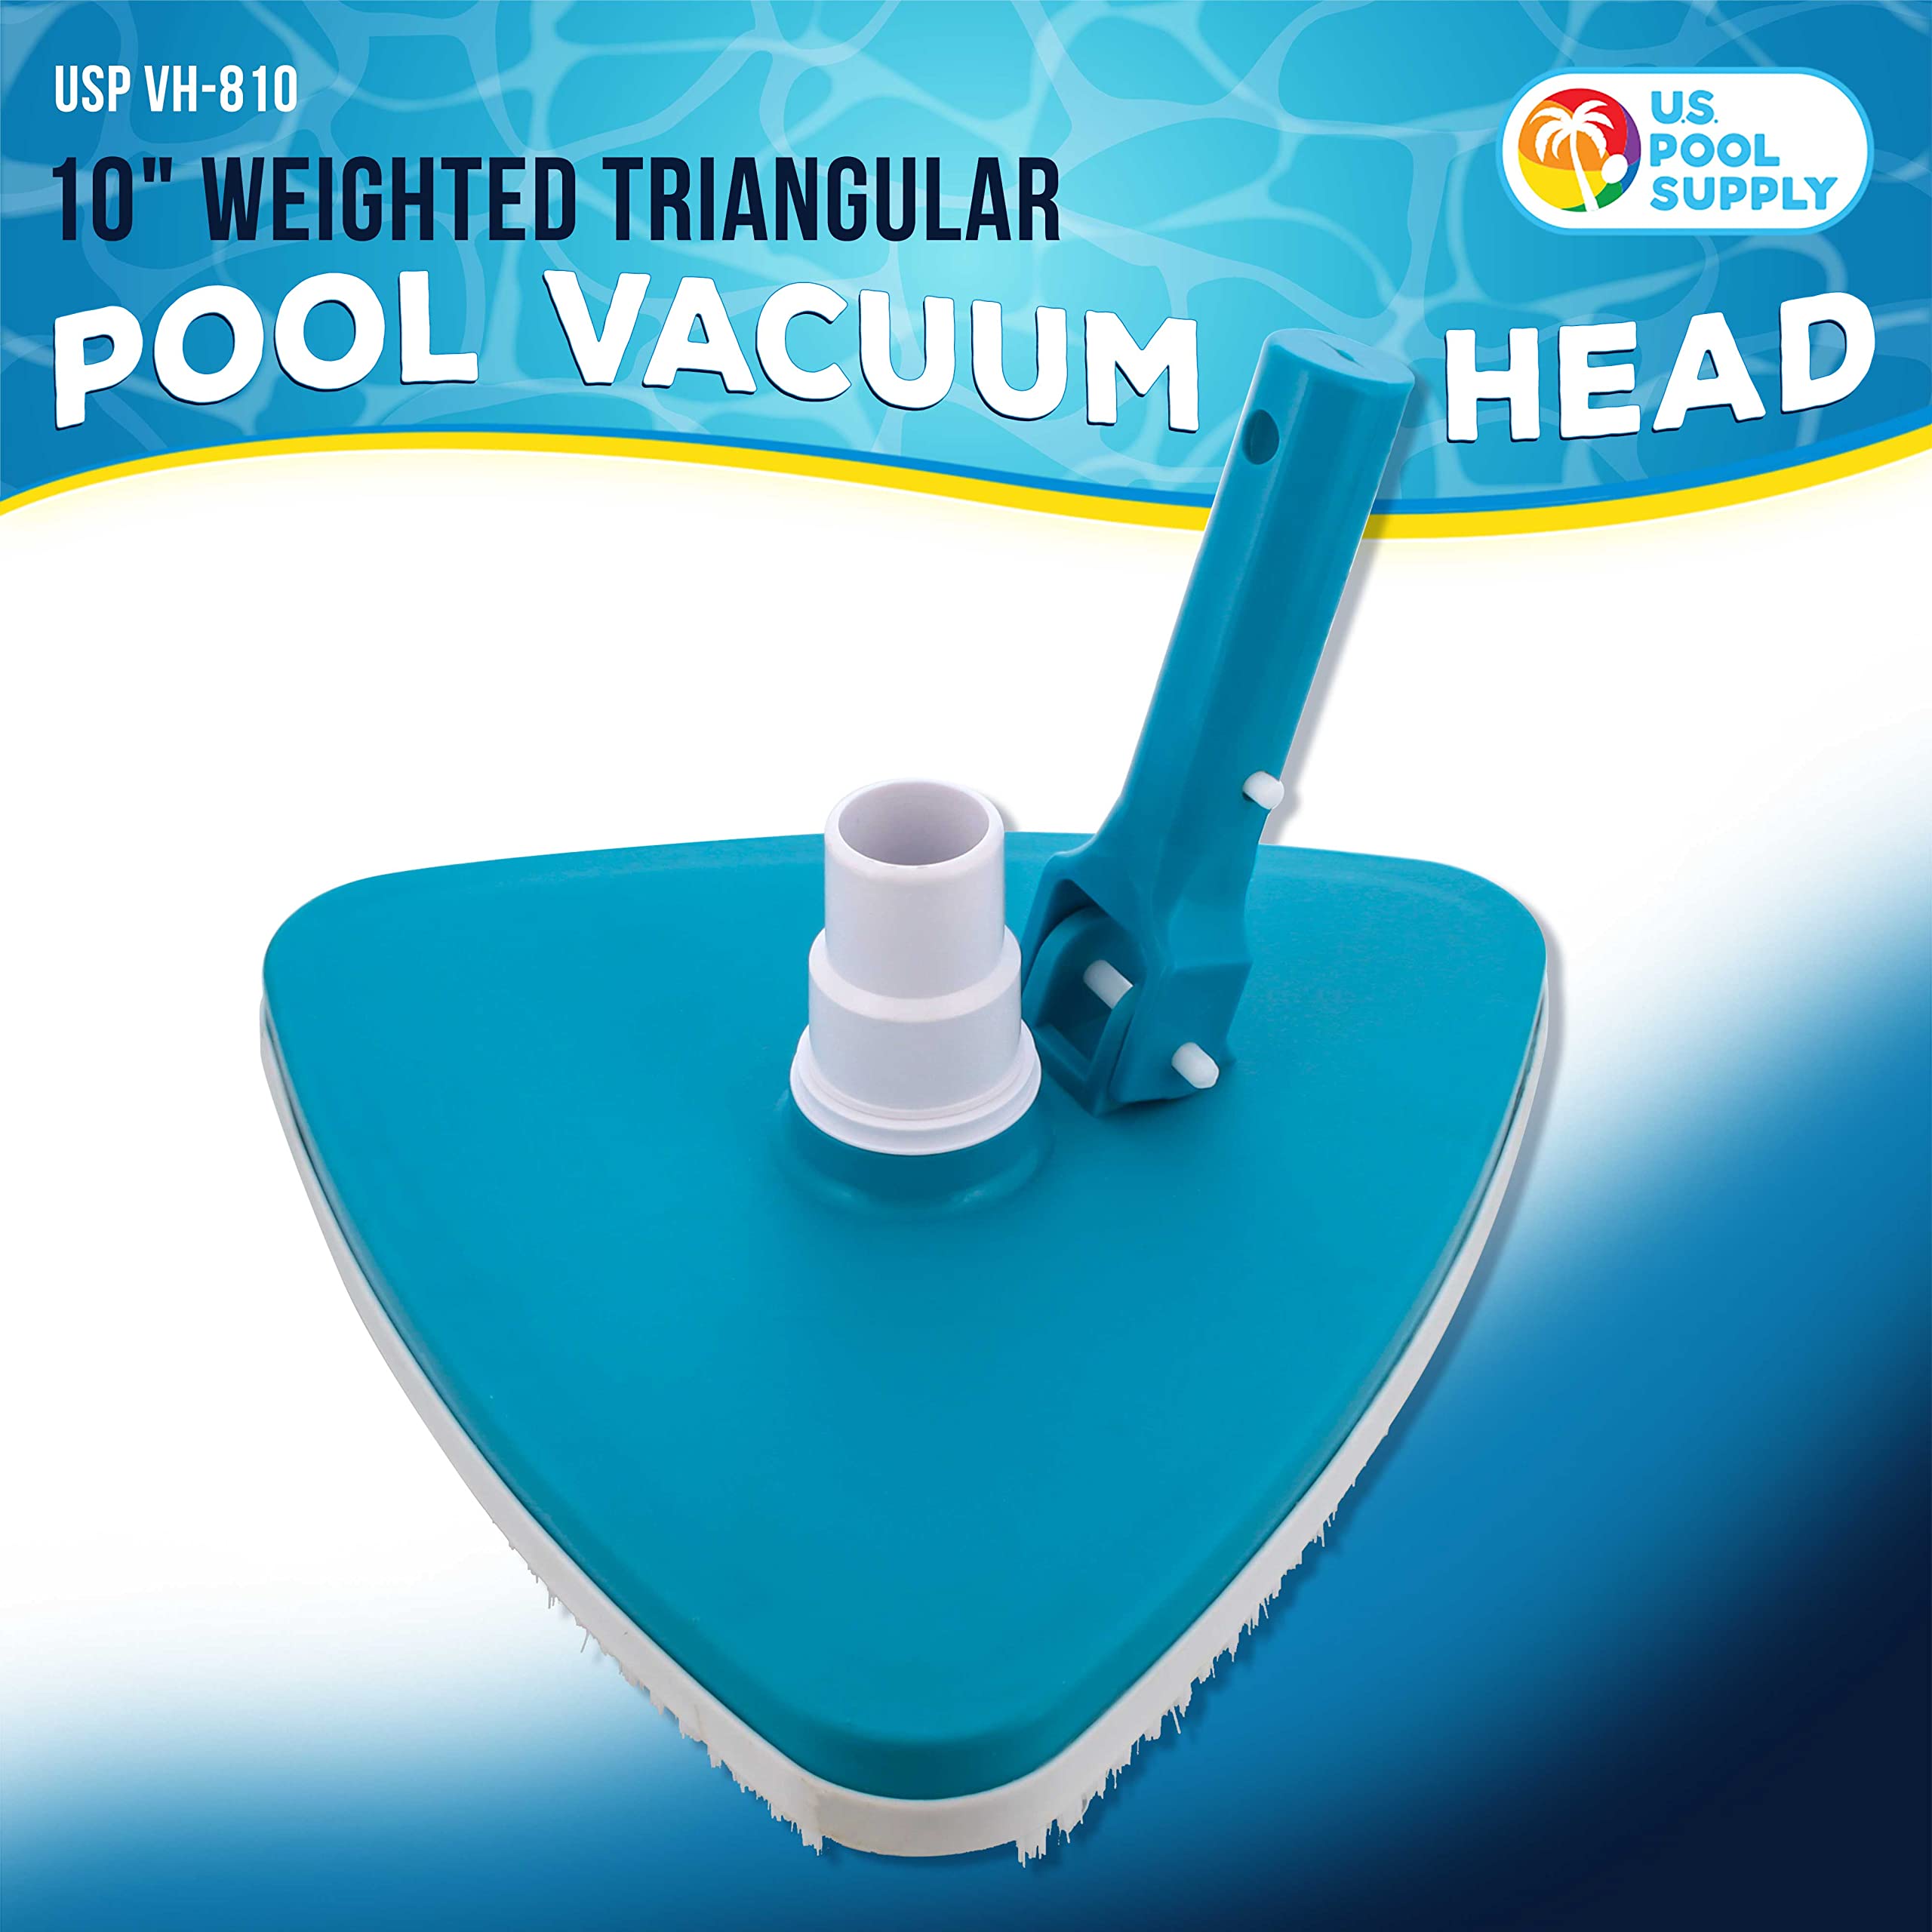 U.S. Pool Supply Weighted Triangular Pool Vacuum Head with Swivel Connection, Pole Handle, Protection Bumper - For Above Ground & In-Ground Swimming Pools – Vinyl Liner Safe, Floor Wall Corner Cleaner